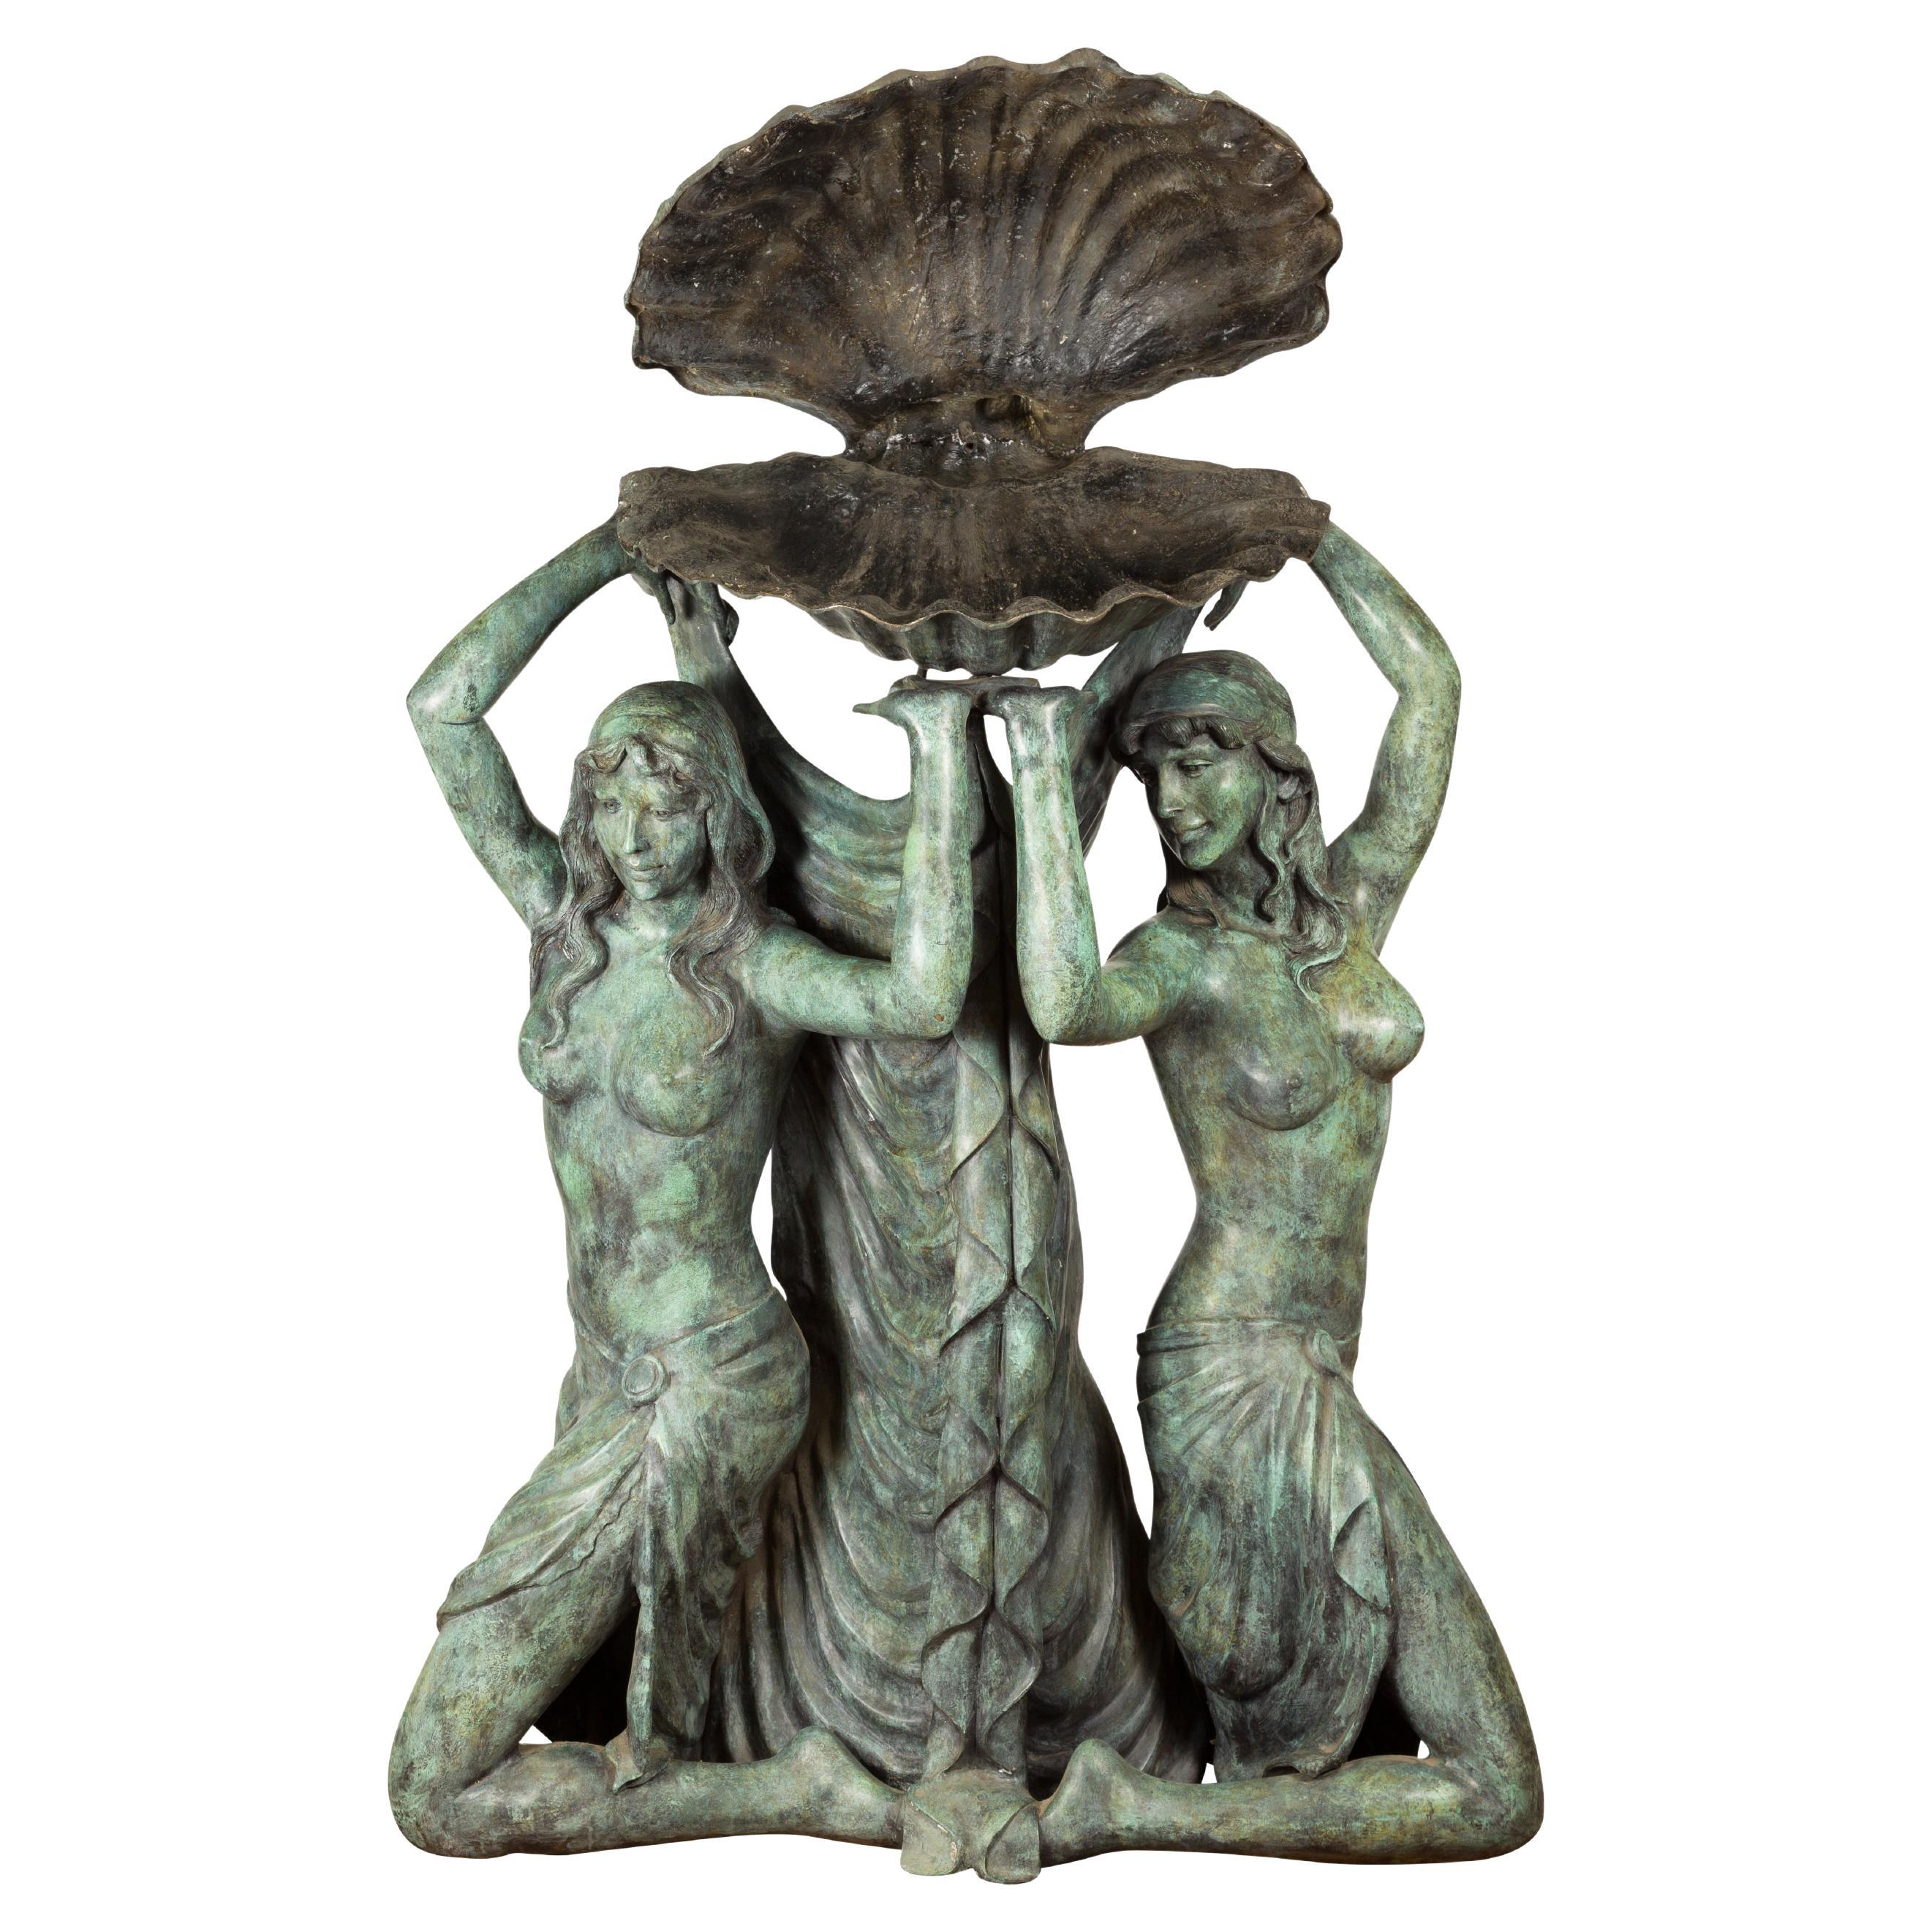 Bronze Greco Roman Inspired Fountain Depicting Three Nymphs Holding a Clamshell For Sale